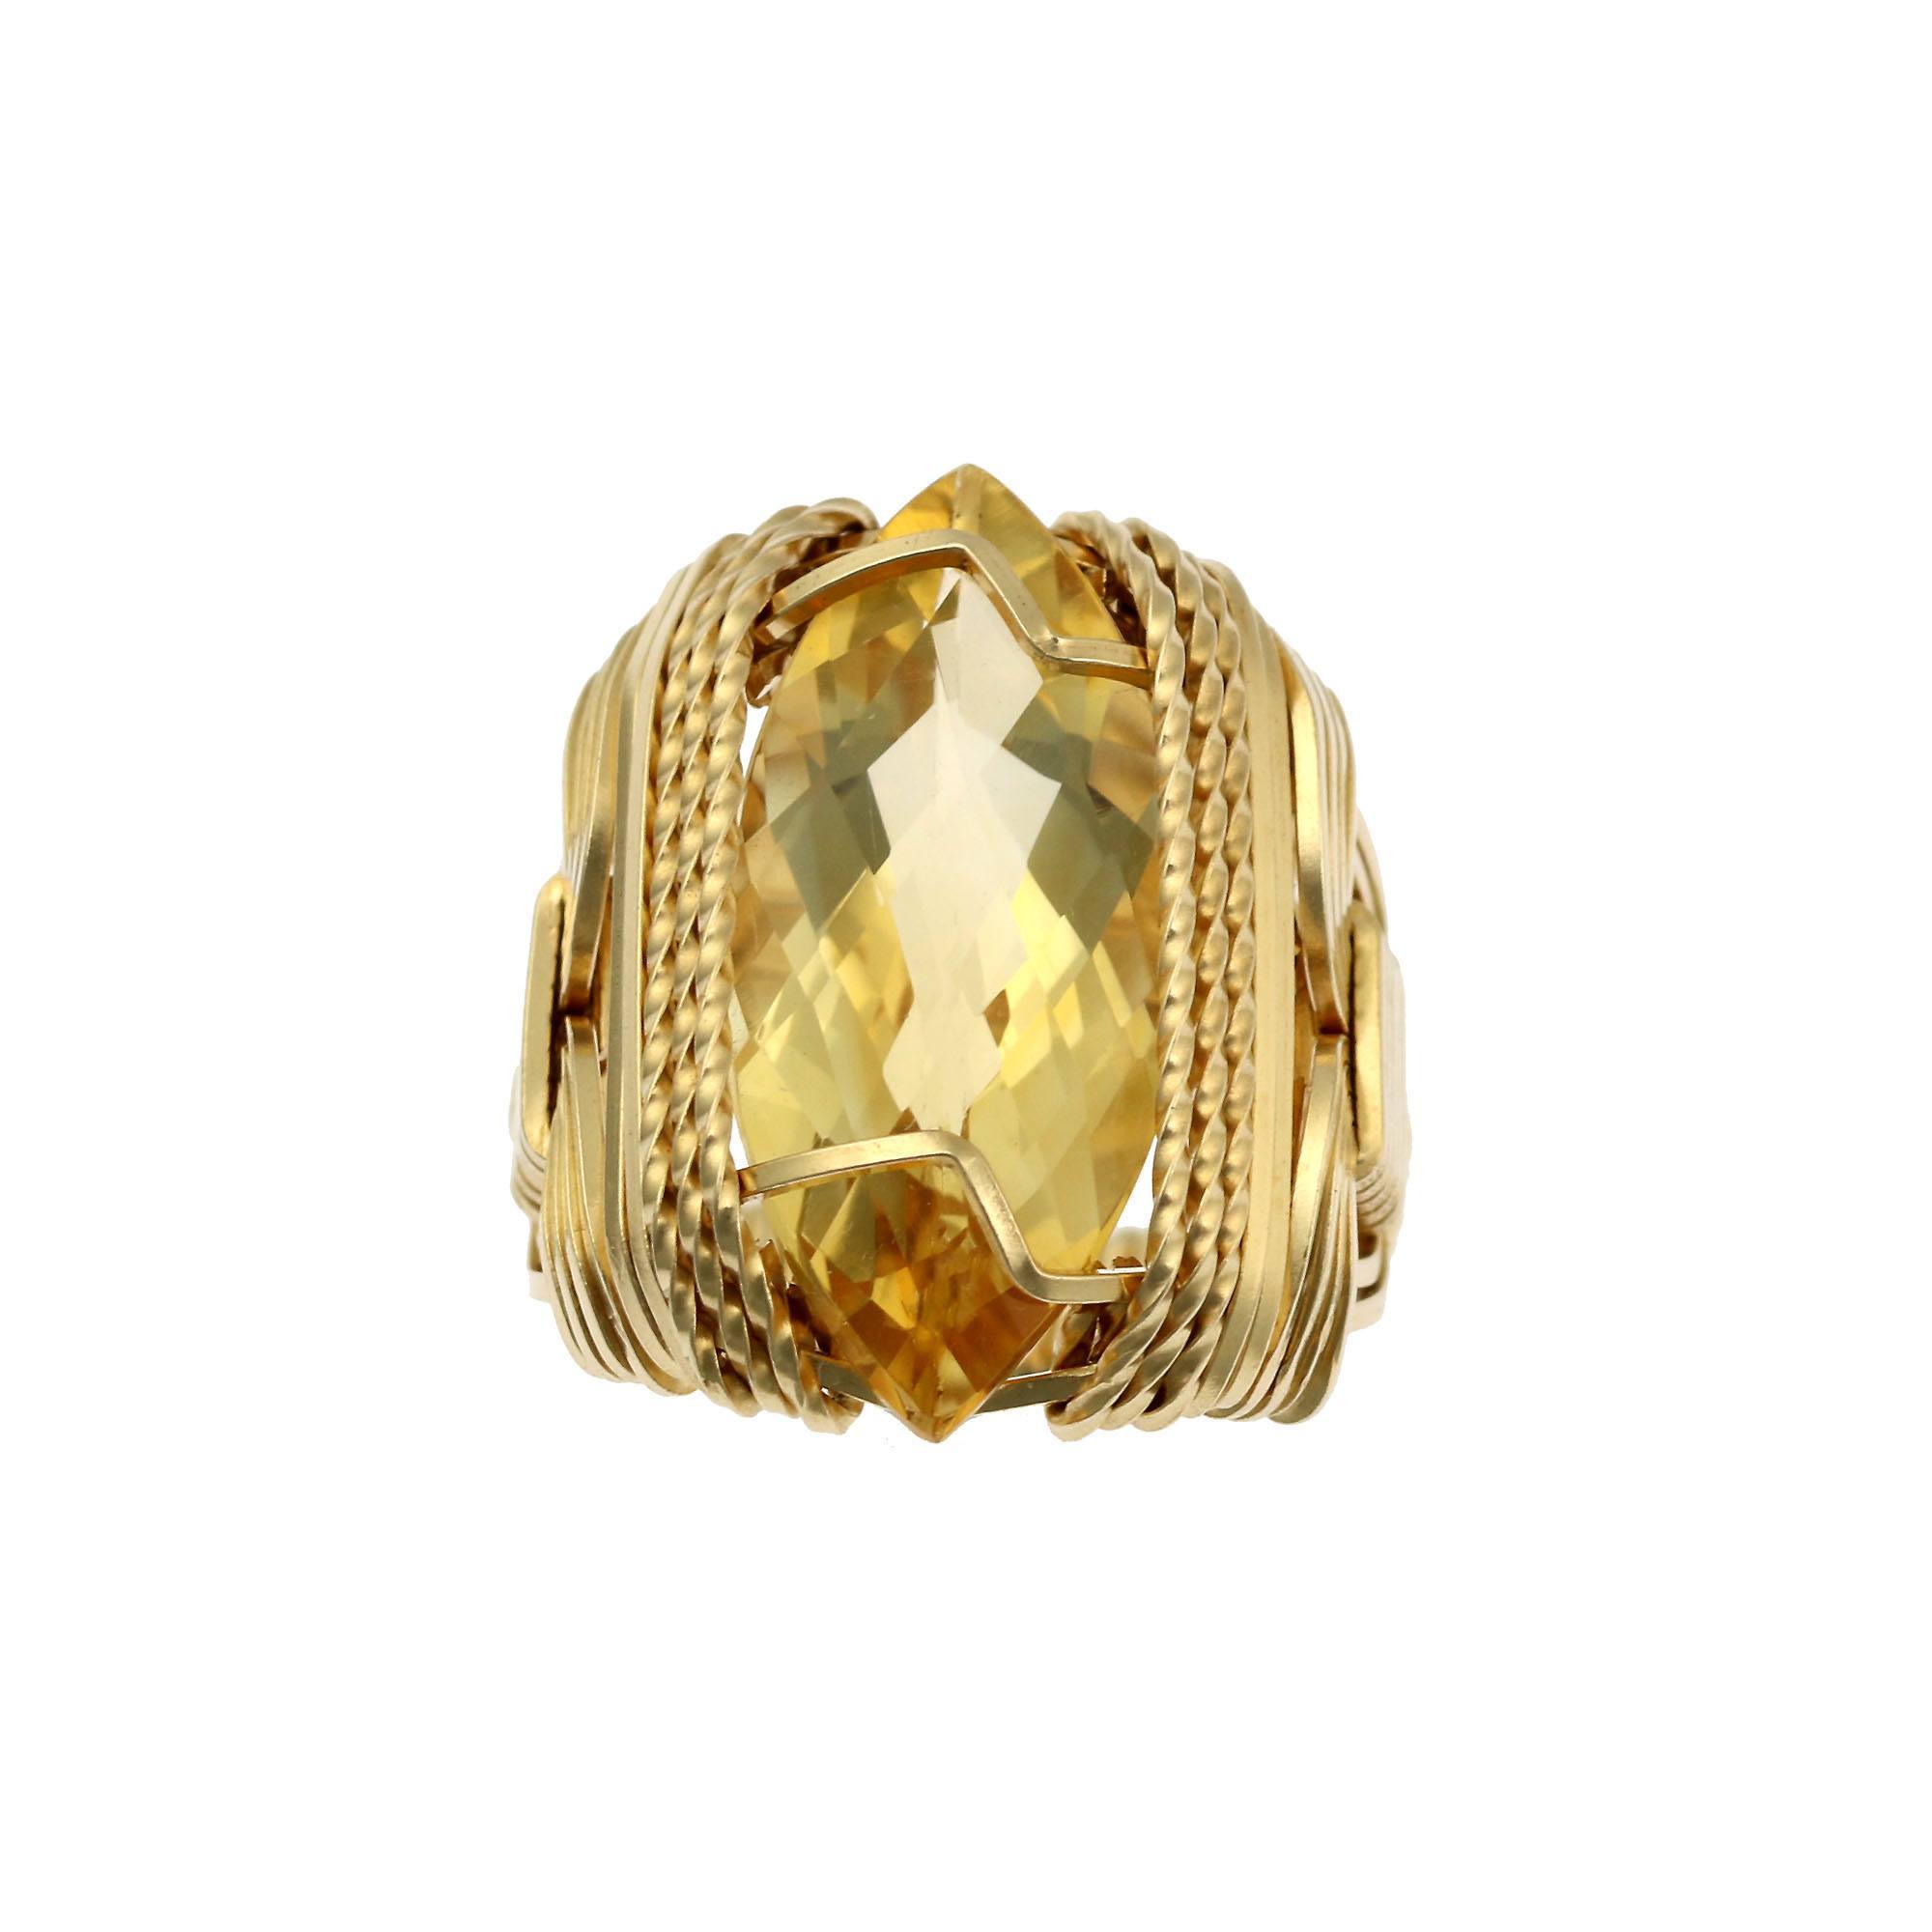 Top View of Citrine 14K Gold-filled Cocktail Ring 